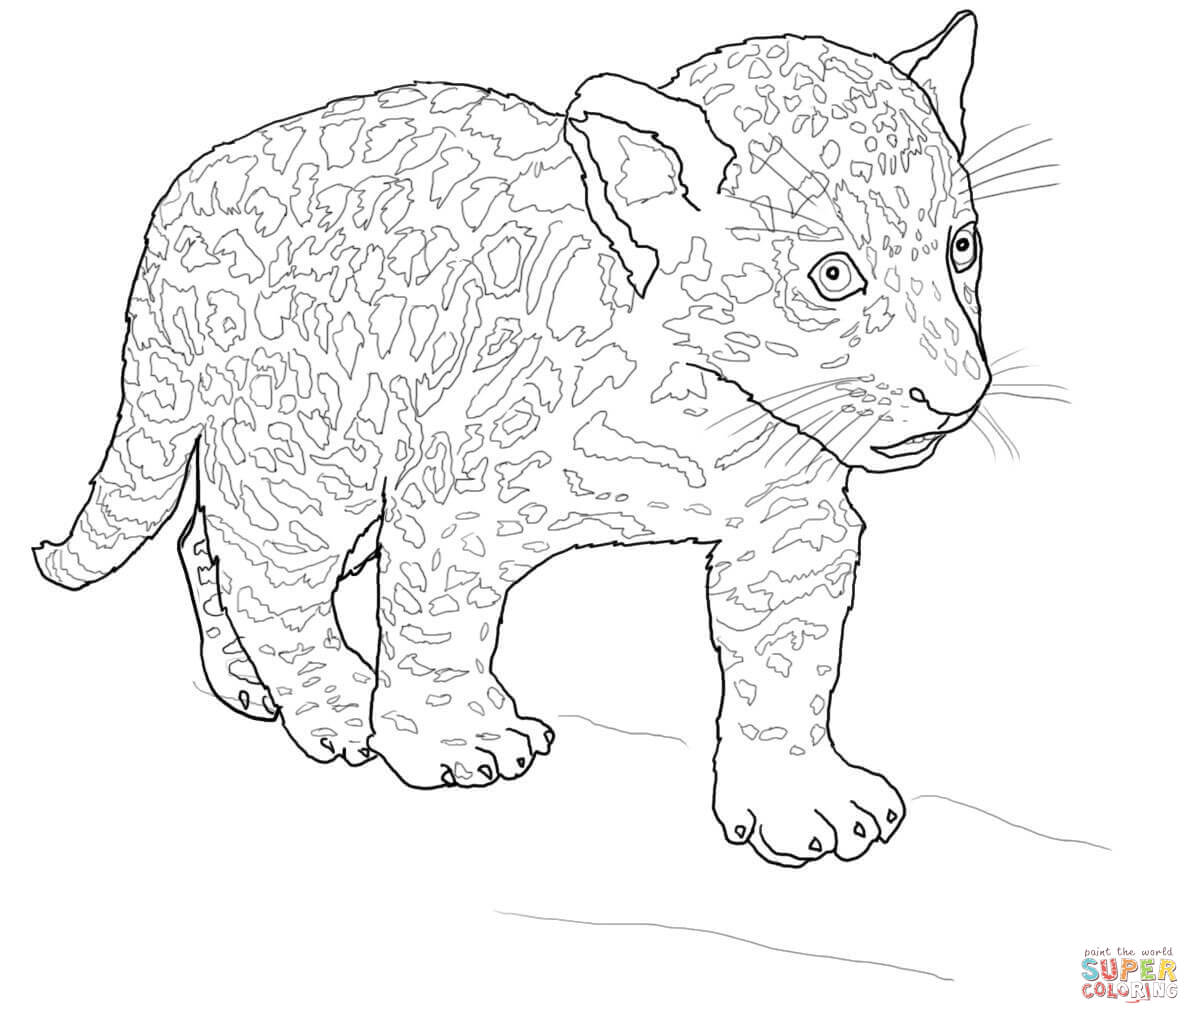 Jaguar coloring pages to download and print for free